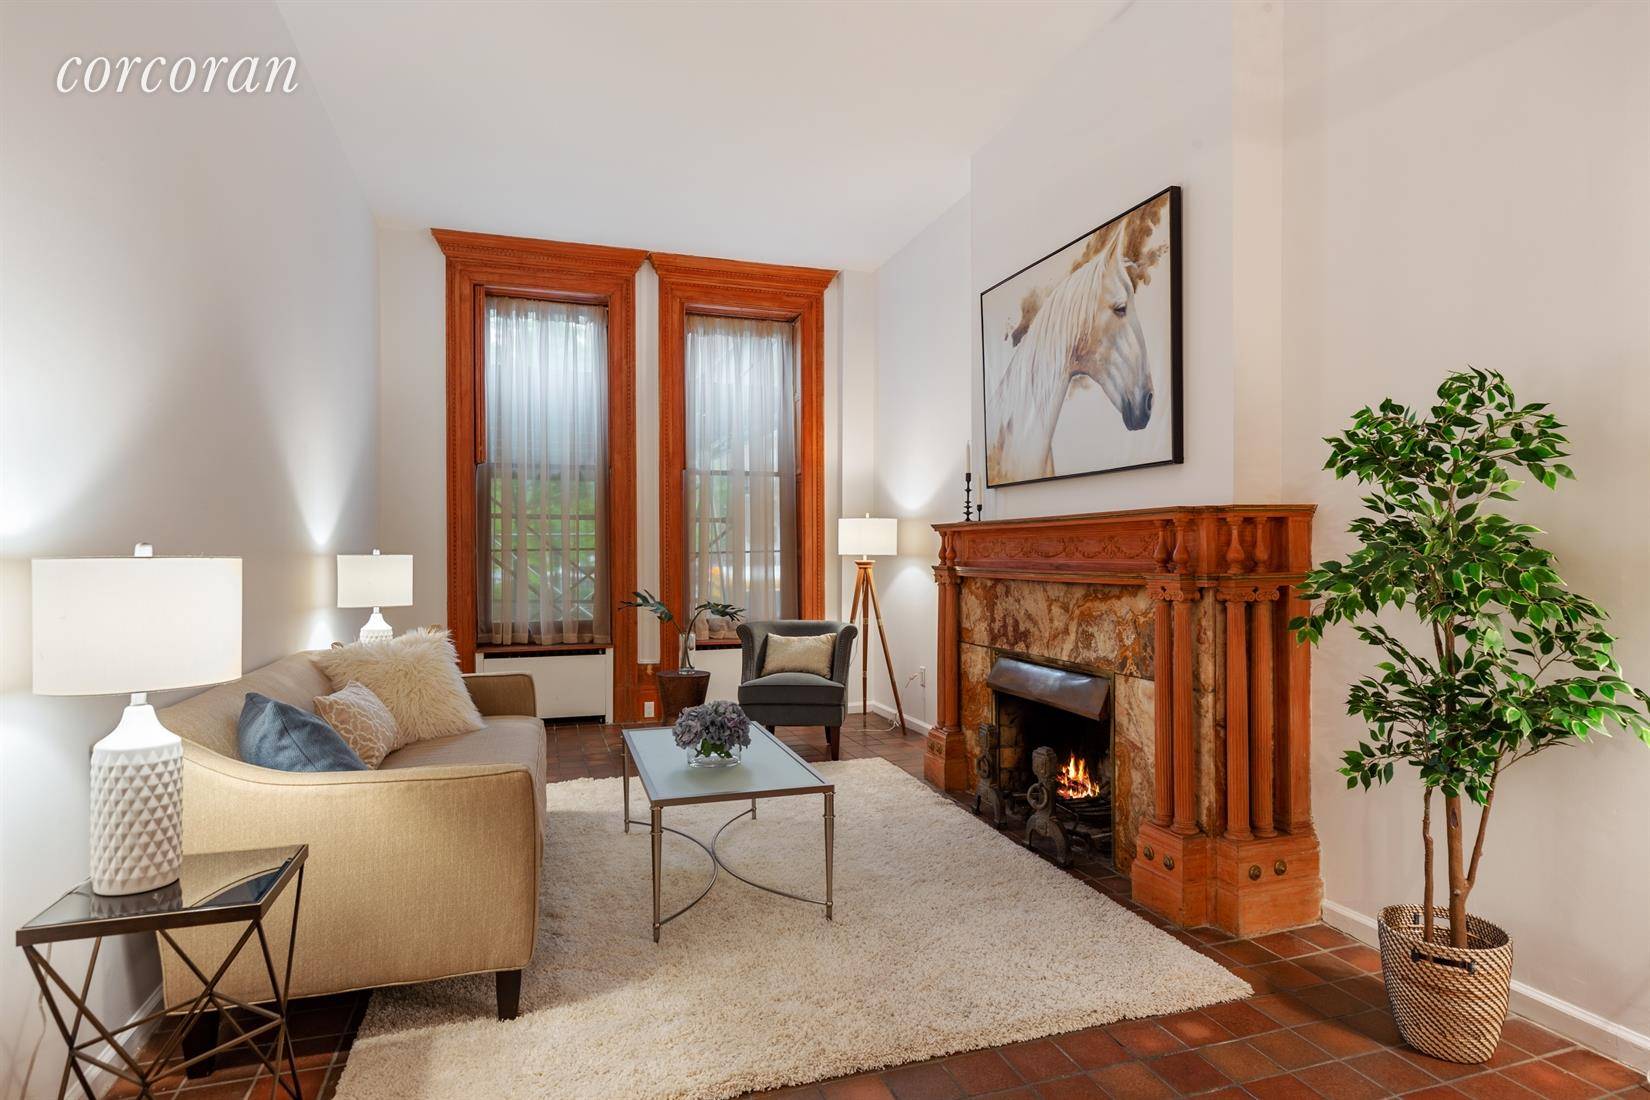 This beautifully maintained three bedroom apartment with private outdoor space, a designated den, and a home office, is the epitome of Manhattan charm.